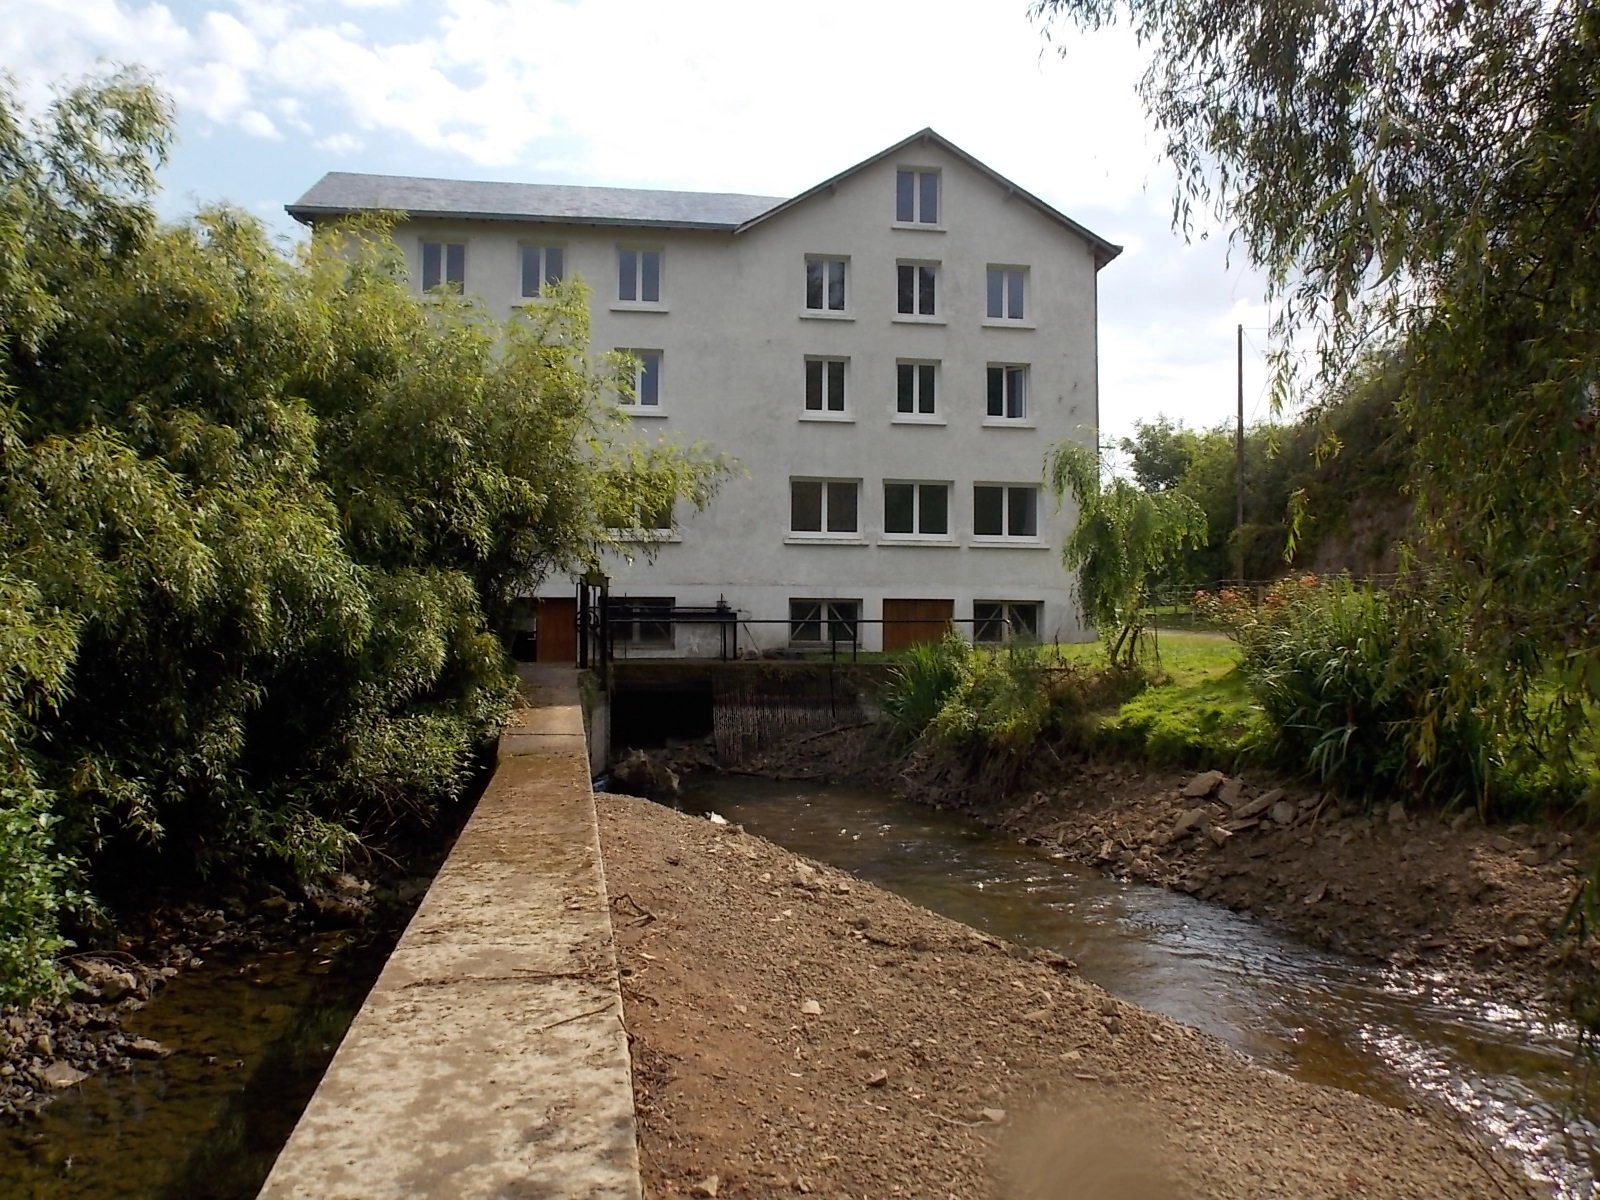 Make an offer ! Partly renovated water mill with accommodation over several floors